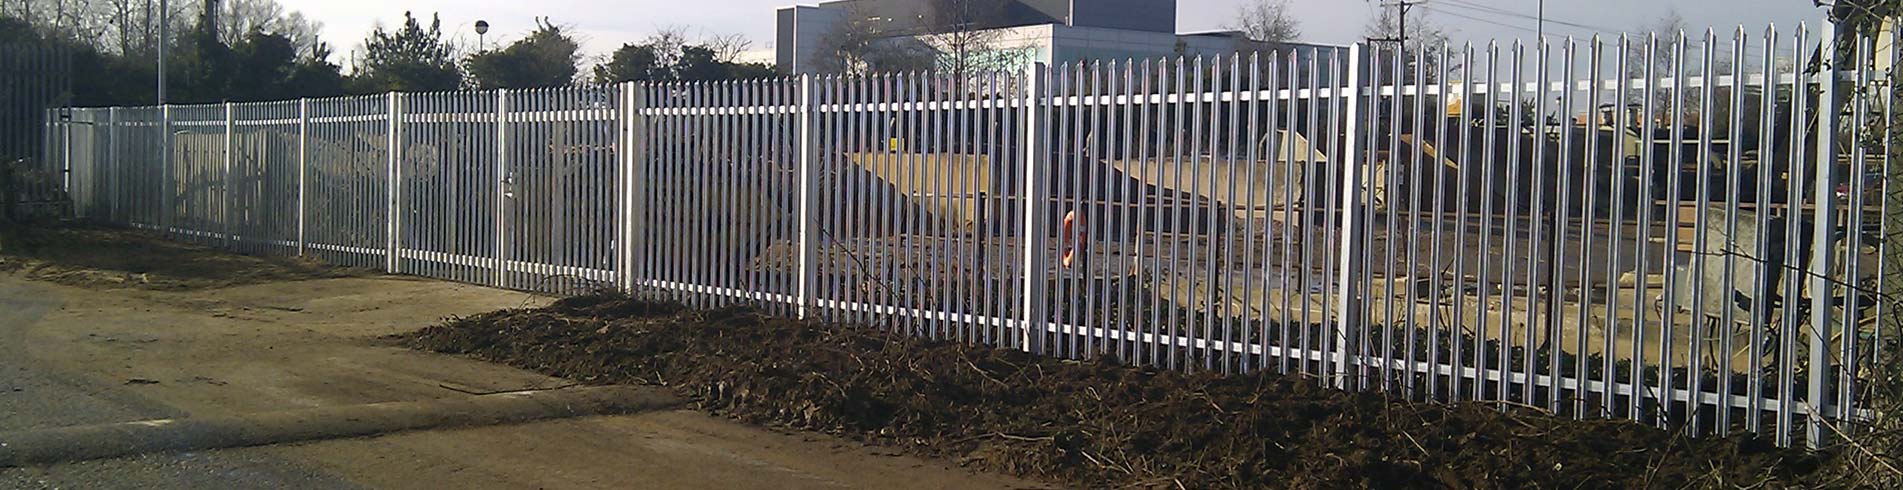 Fencing Installers in Suffolk and Essex